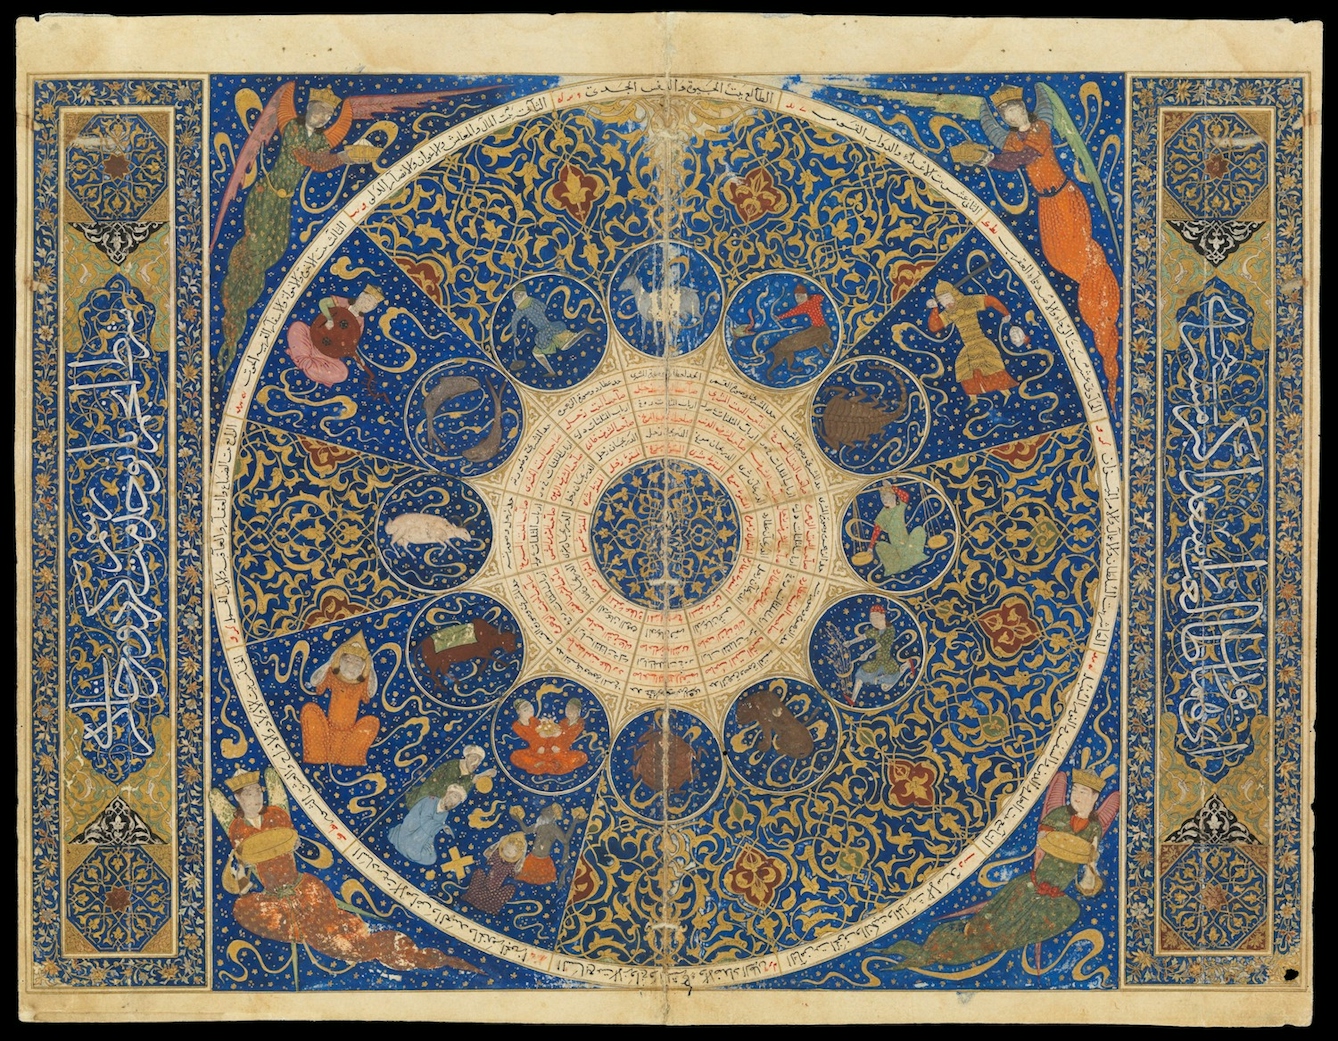 Image of colour manuscript in gold and blue, representing a horoscope. Large circle is in the middle with smaller circles in the centre. Inside these are symbols representing the signs of the zodiac.